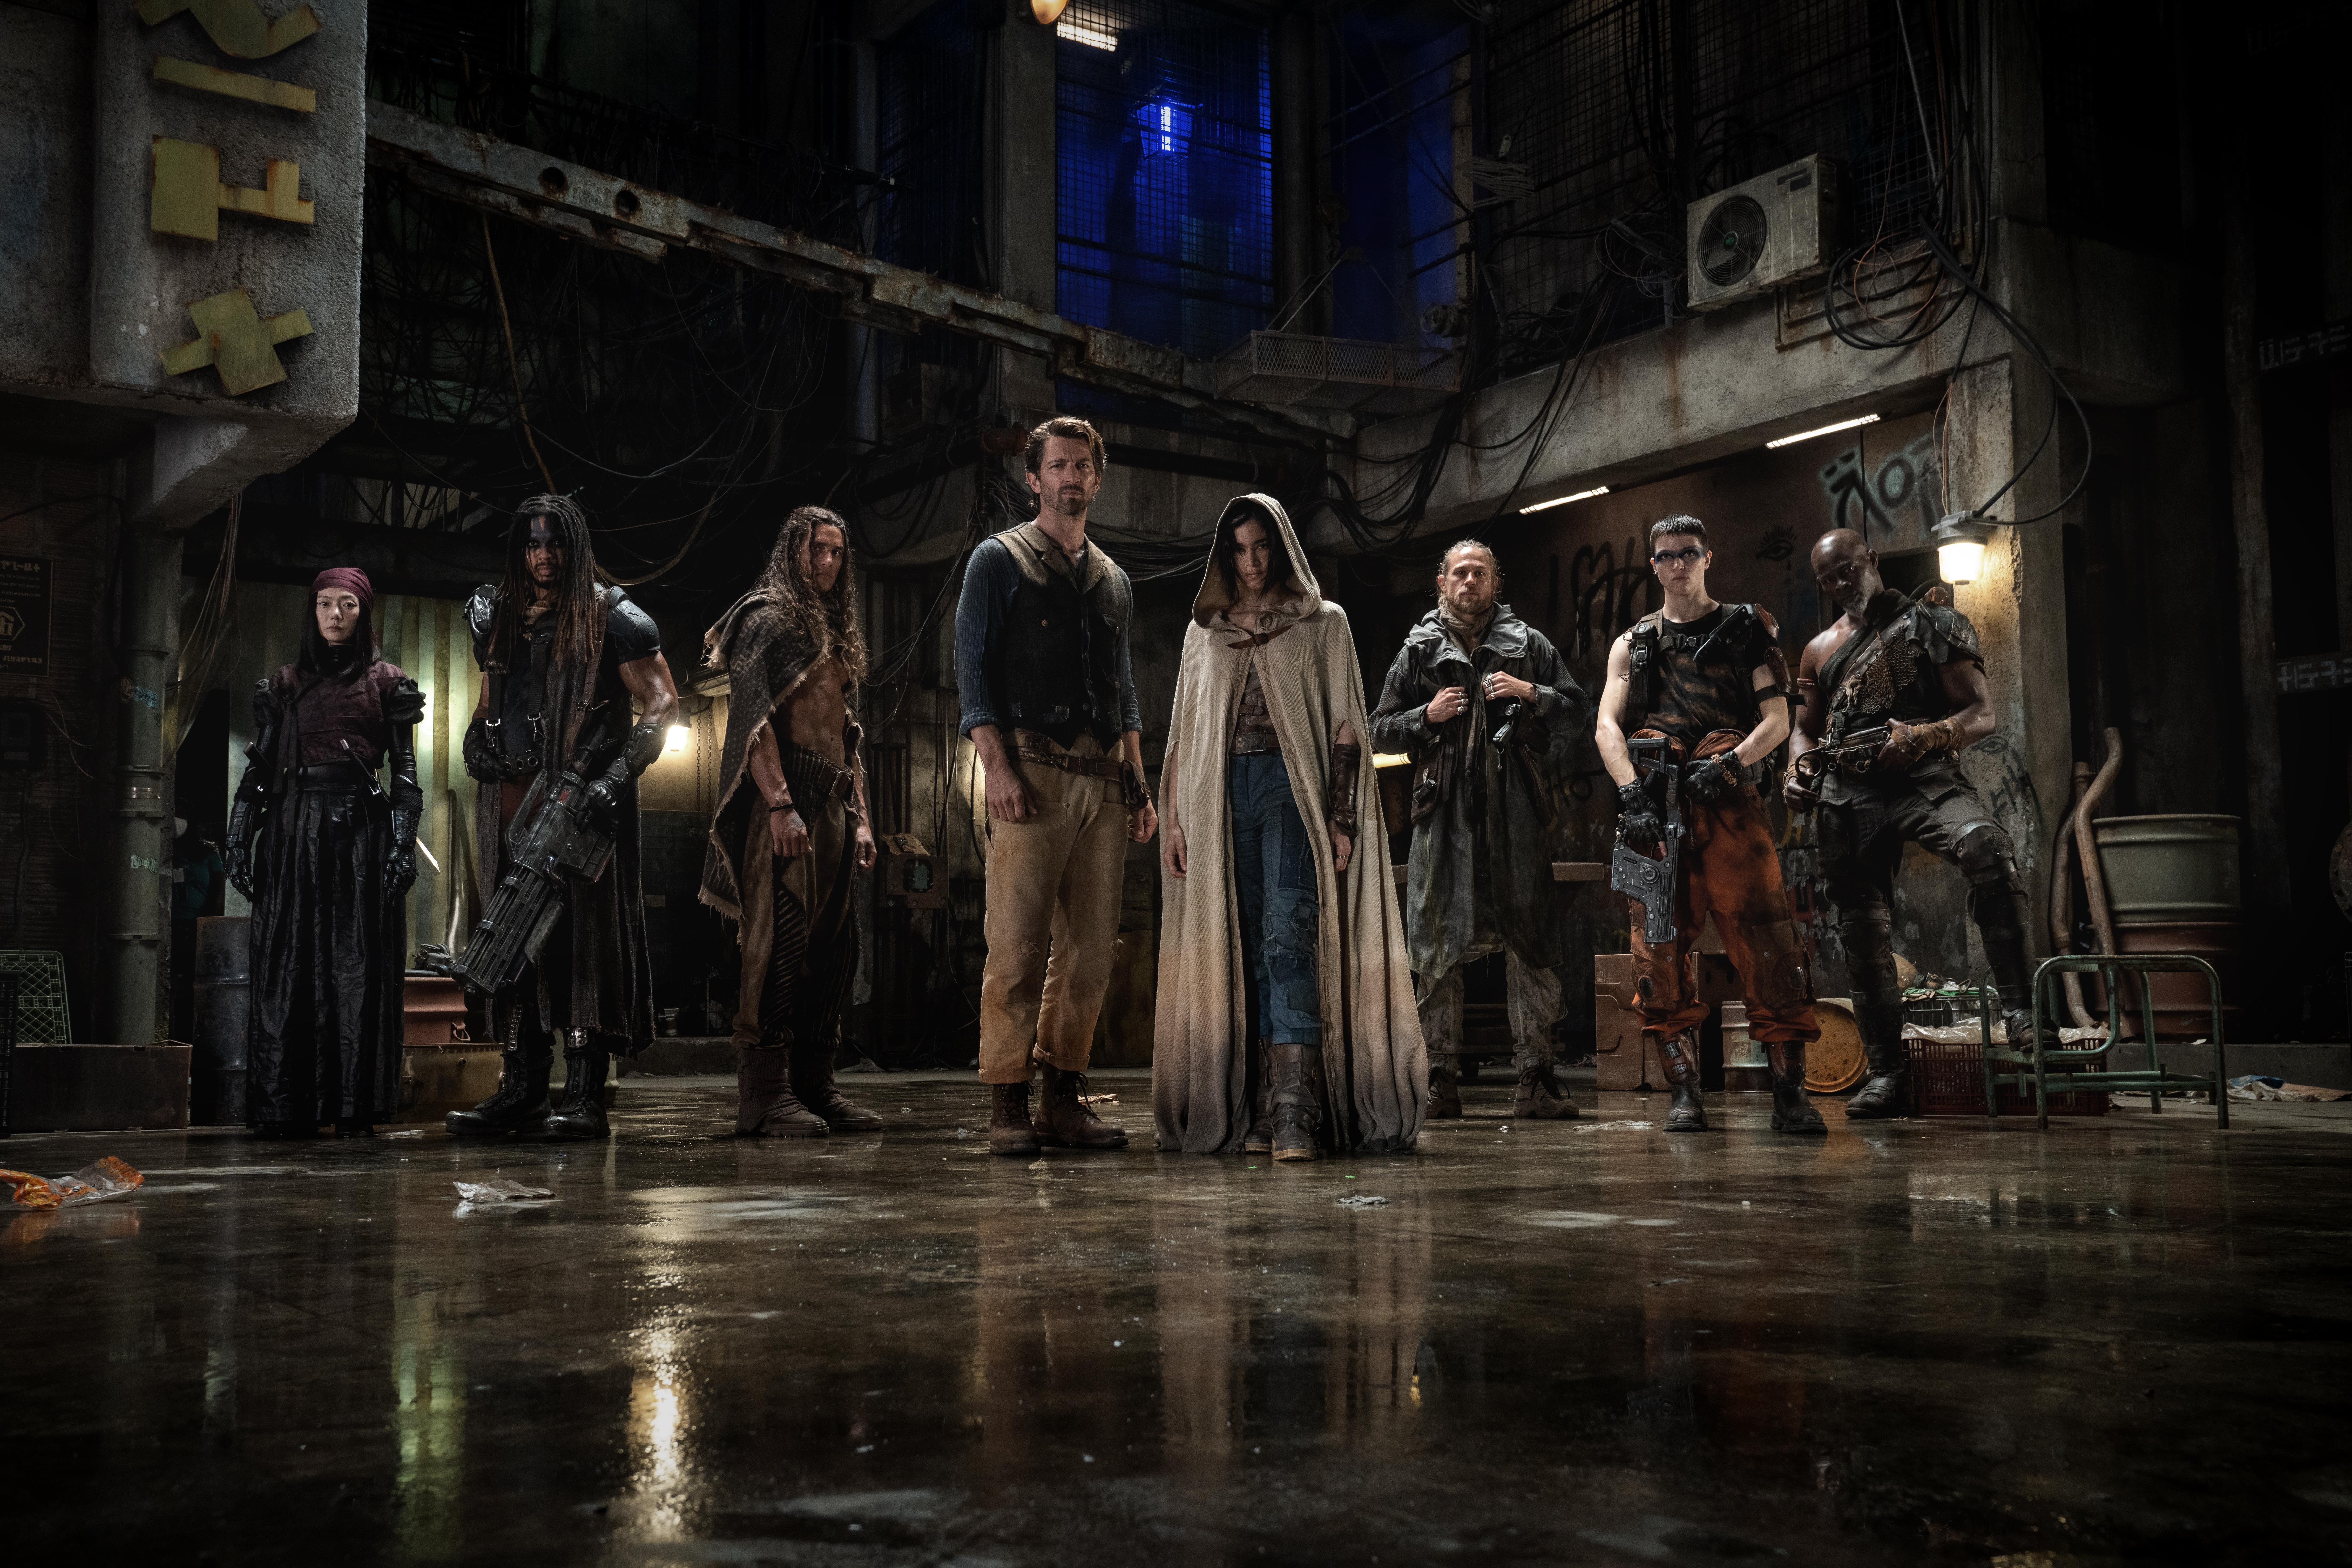 Djimon Hounsou, Bae Doona, Michiel Huisman, Charlie Hunnam, Elise Duffy, Sofia Boutella, Clay Enos, Ray Fisher, and Staz Nair in Rebel Moon - Part One: A Child of Fire (2023)